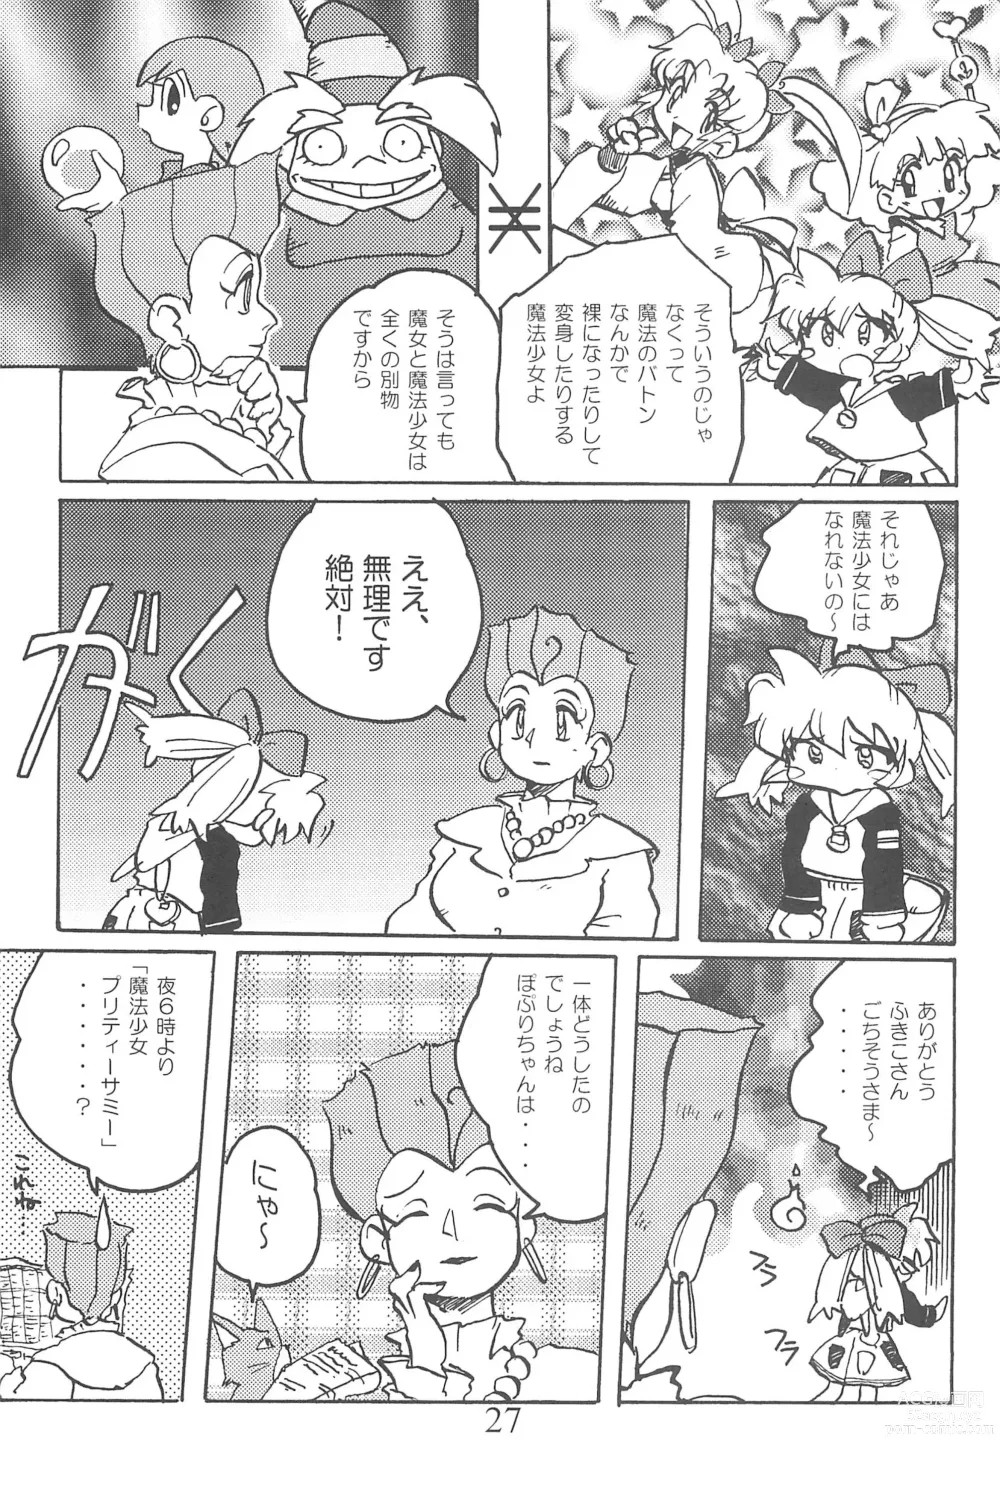 Page 27 of doujinshi Amuse-gueule